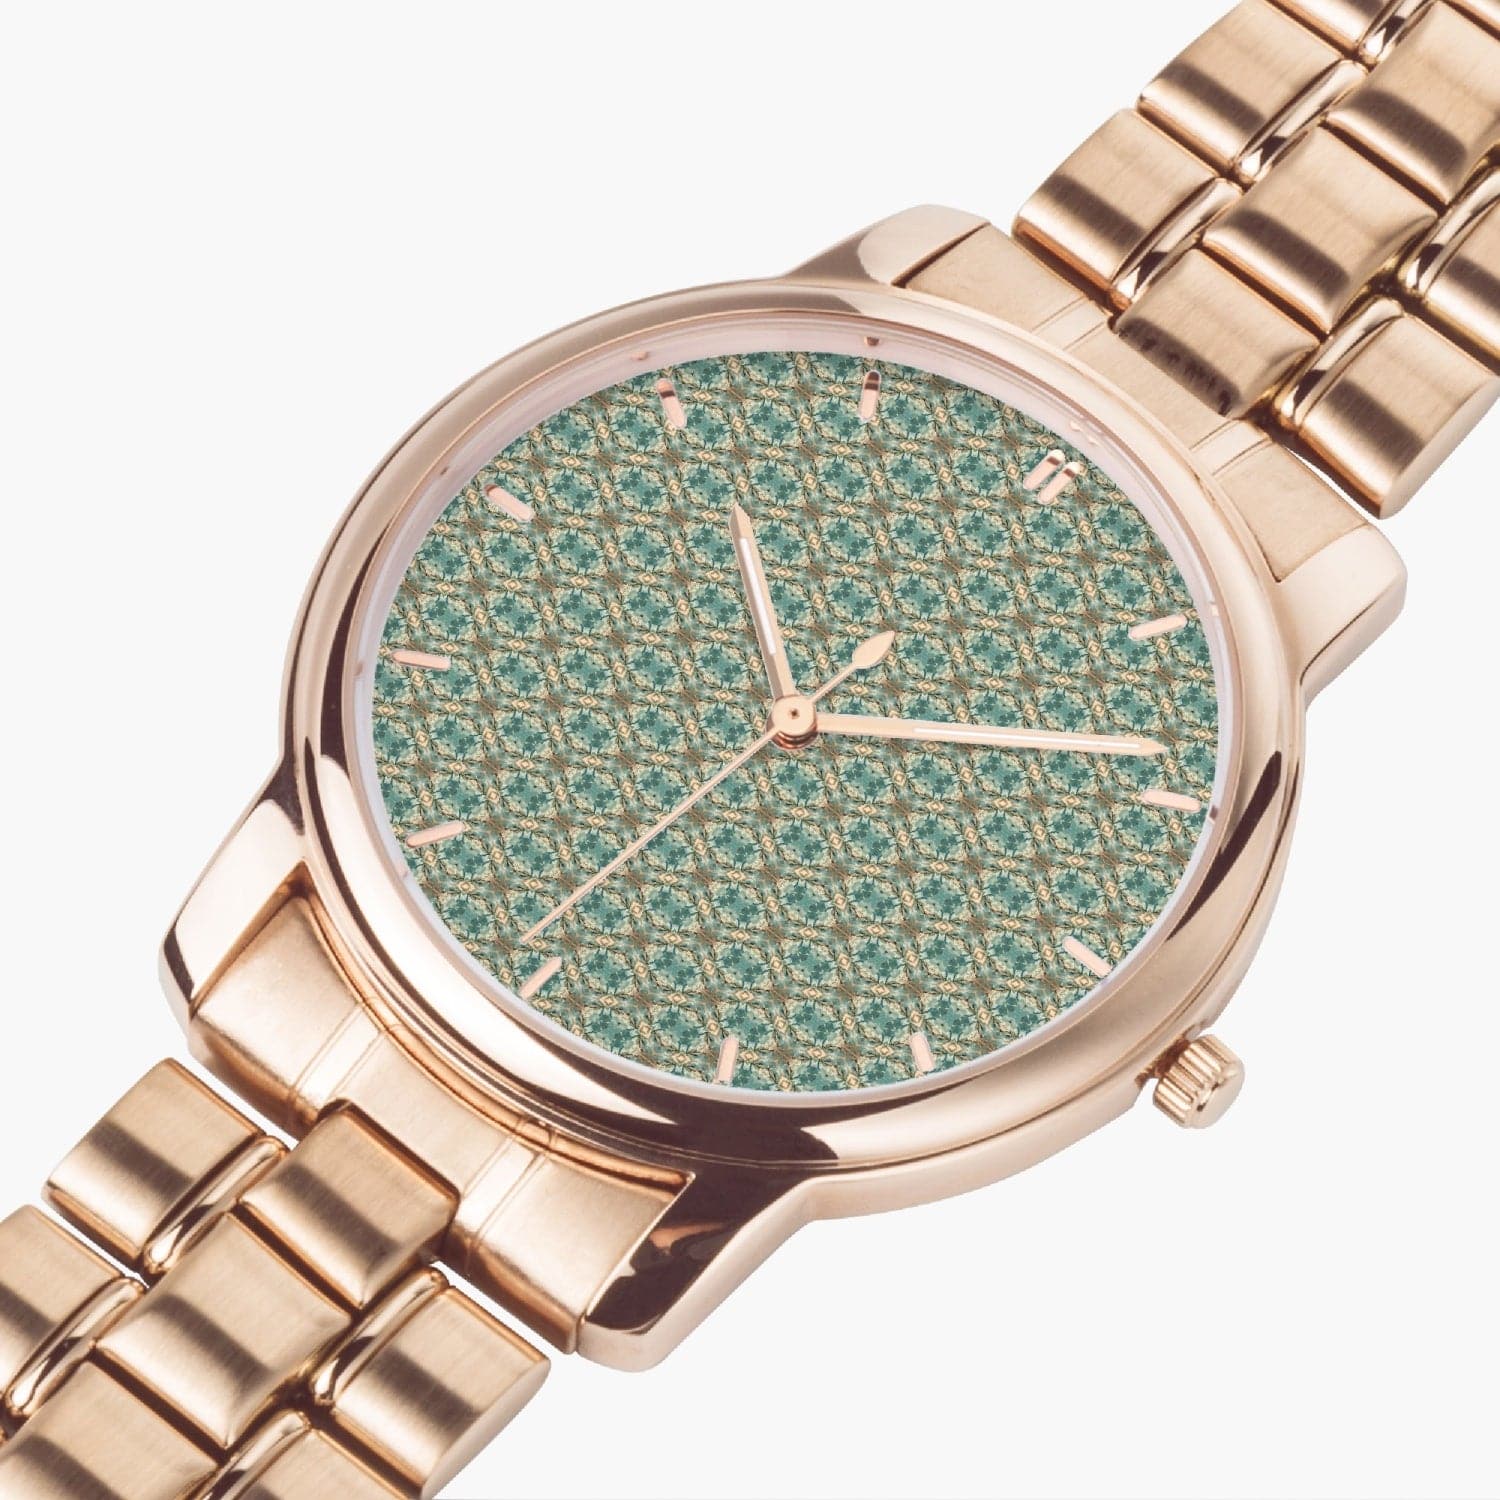 Beige and Blue fine Pattern Watch for Him/Her,  Folding Clasp Type Stainless Steel Quartz Watch (With Indicators)